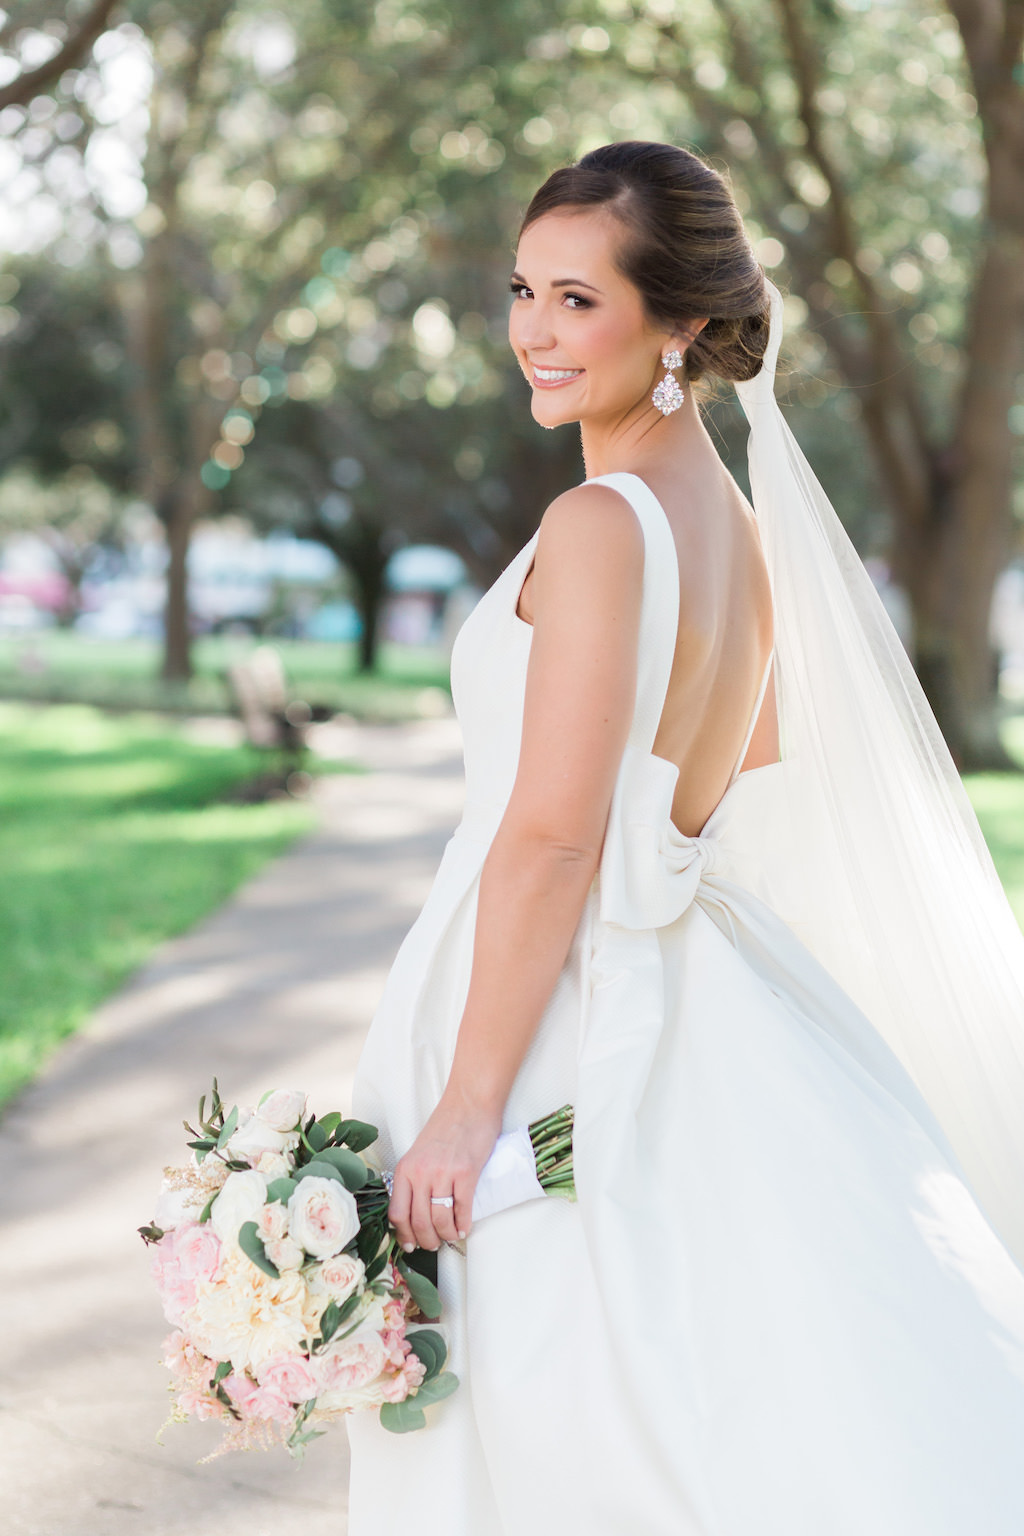 Outdoor Park Bridal Wedding Portrait in Open Back with Bow Rosa Clara Bridal Dress, with Blush Pink and White Peony Bouquet with Greenery, Comb Veil and Large Drop Earrings | St Pete Wedding Hair and Makeup Michele Renee The Studio